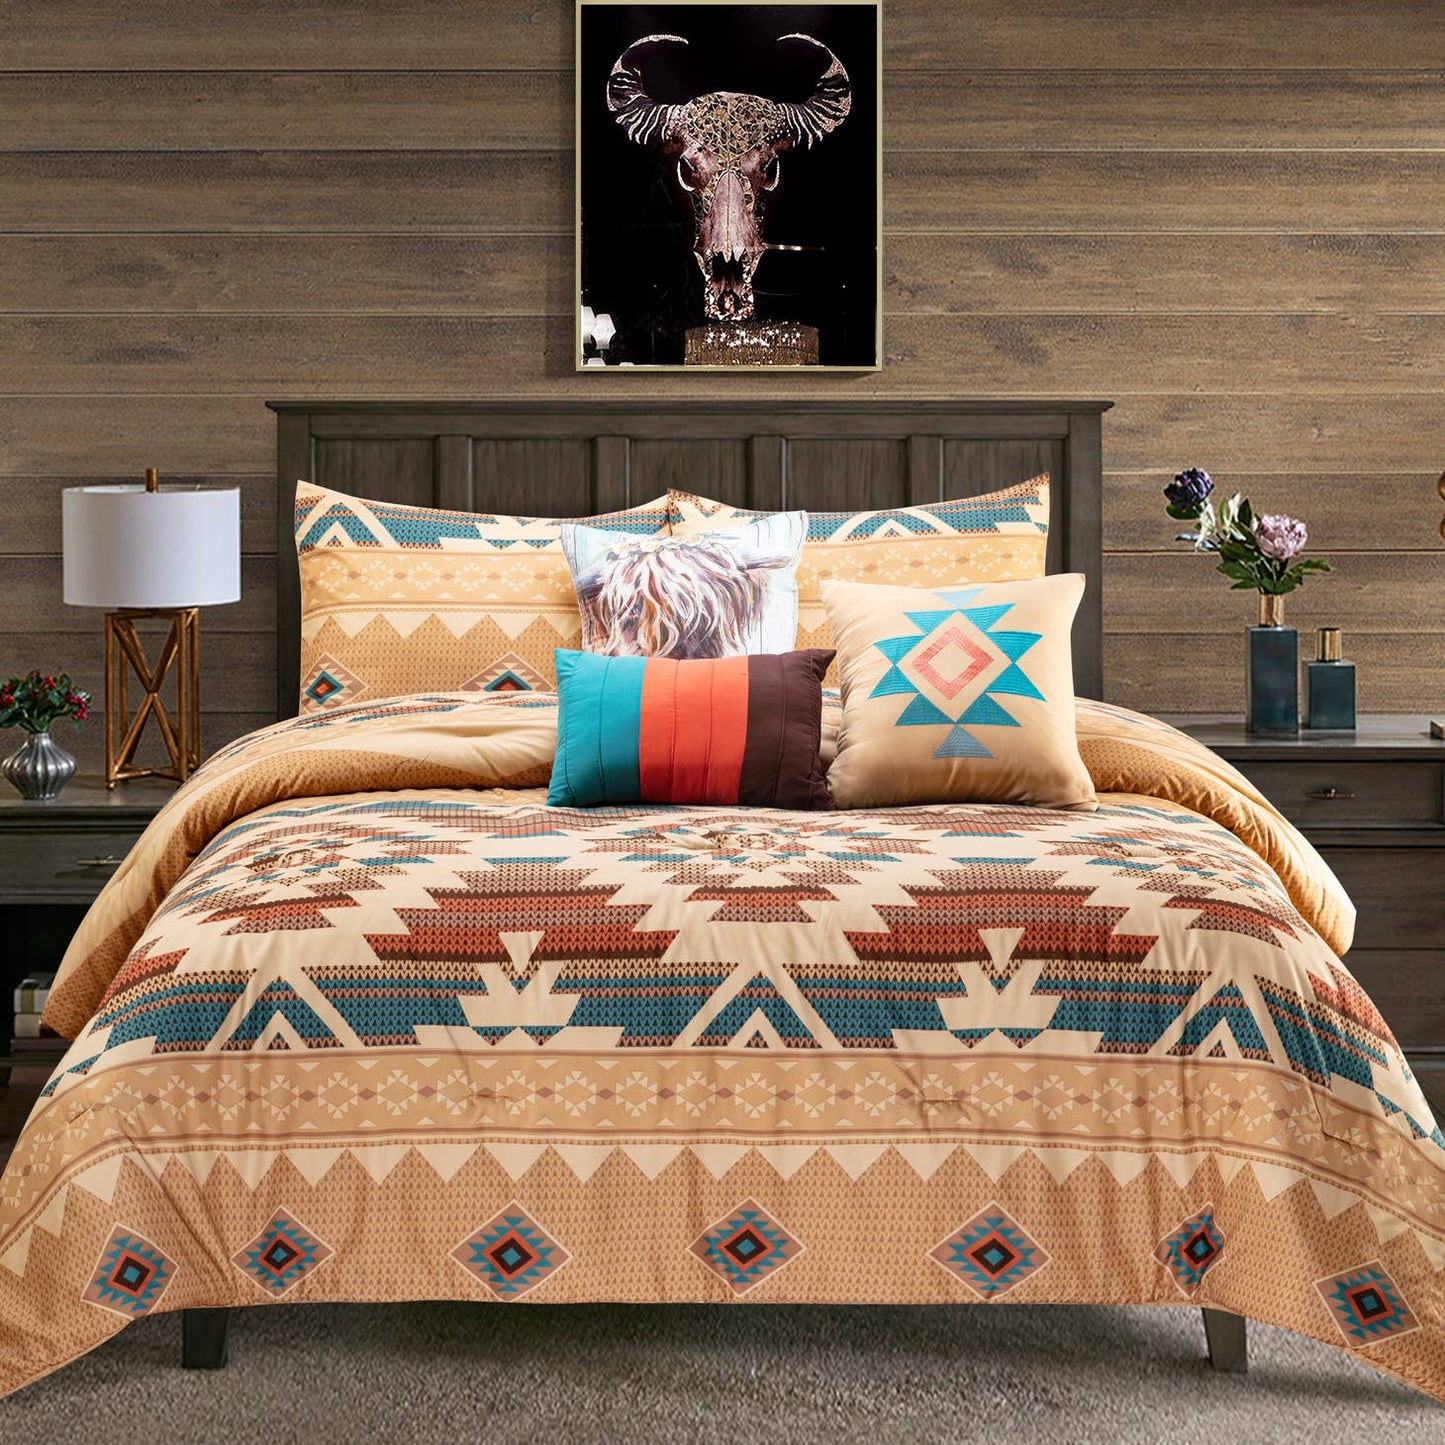 Tan and Turquoise 6pc comforter set